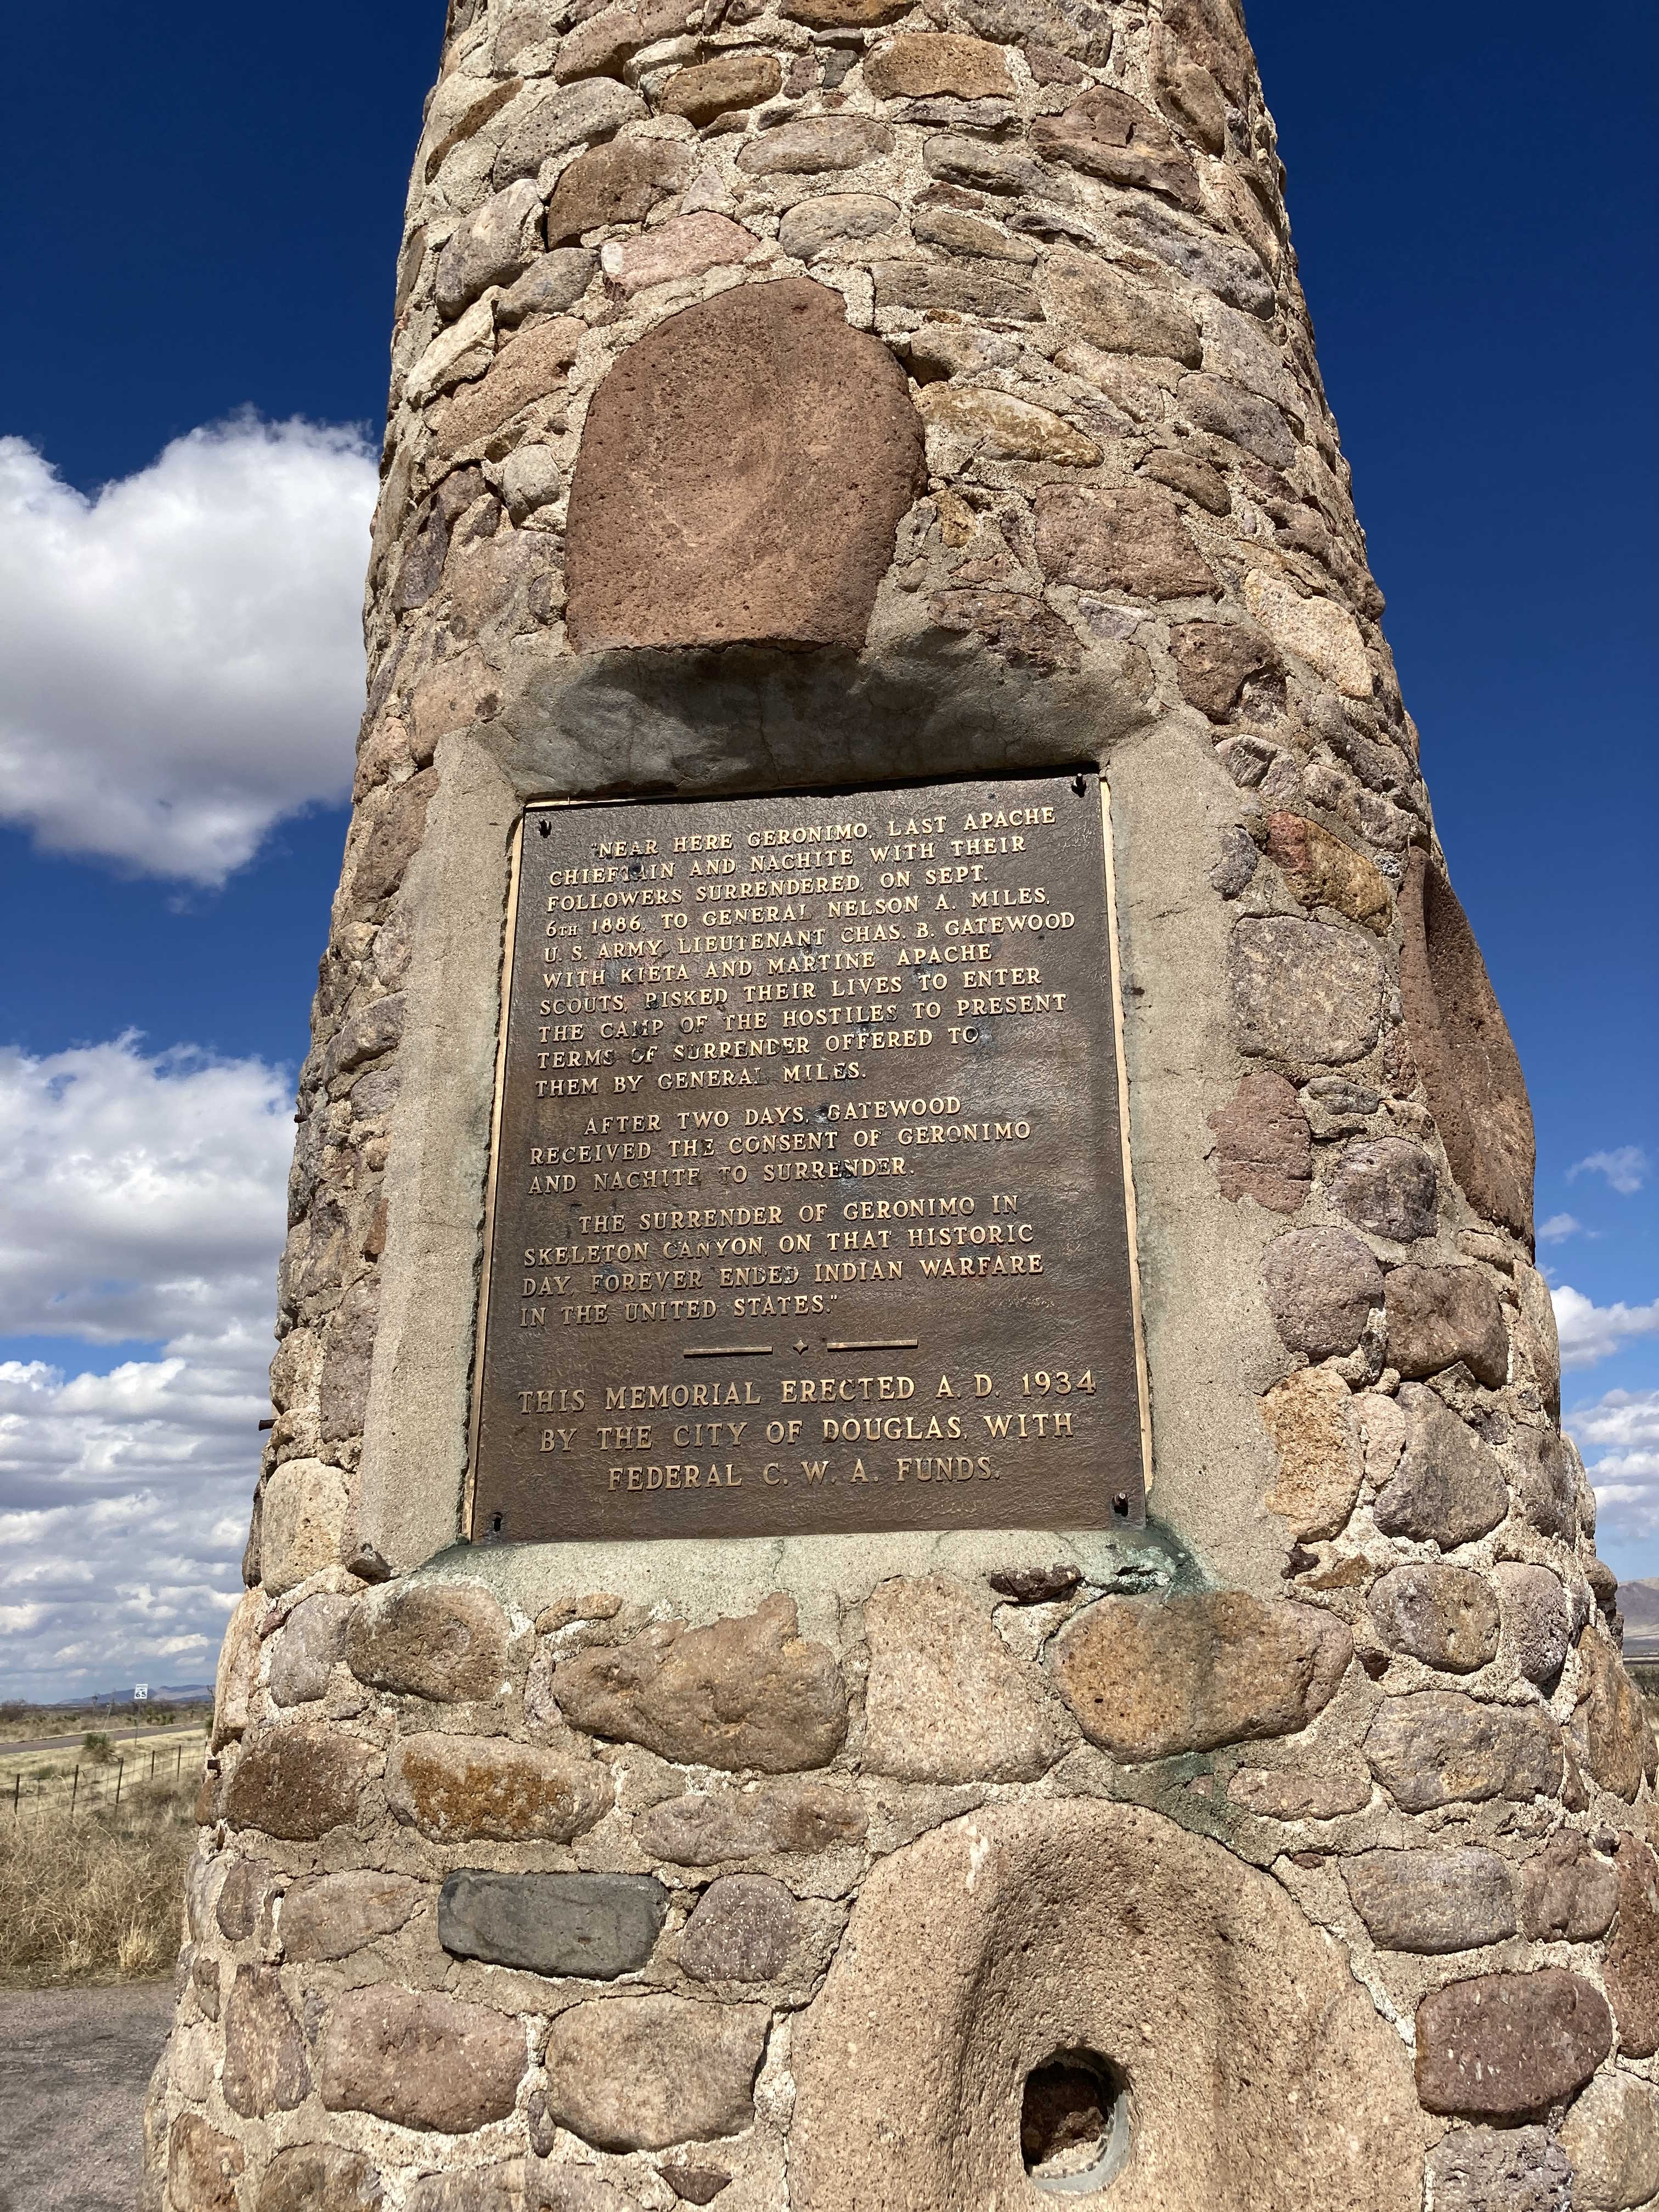 Monument to Geronimo's surrender